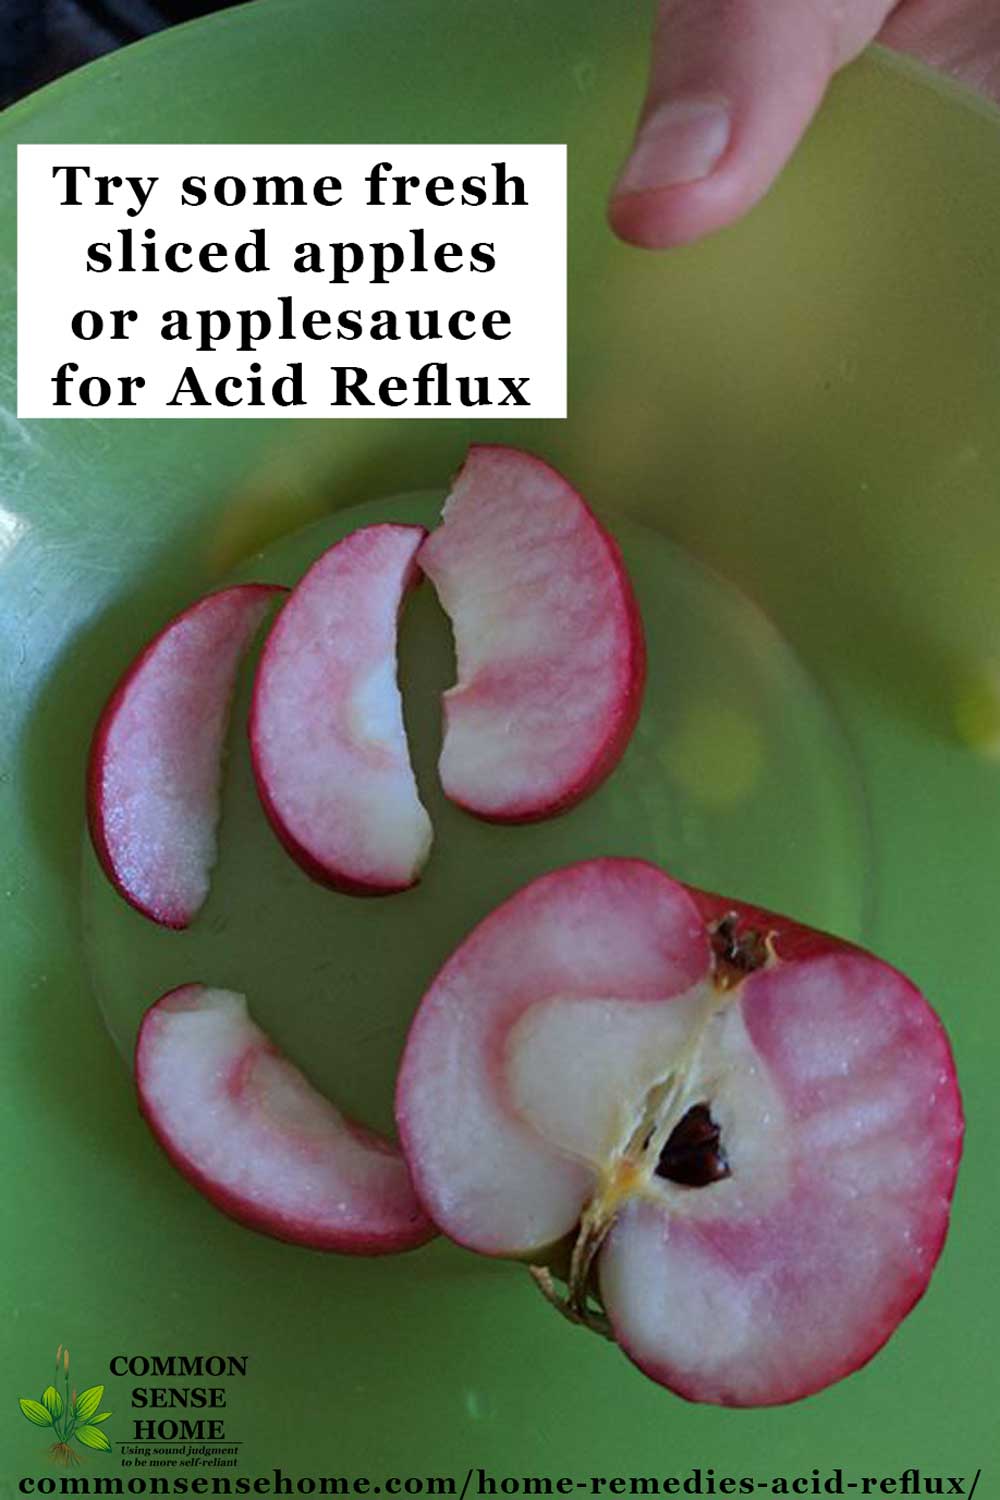 Homesteading Alliance: 10 Home Remedies for Acid Reflux ...